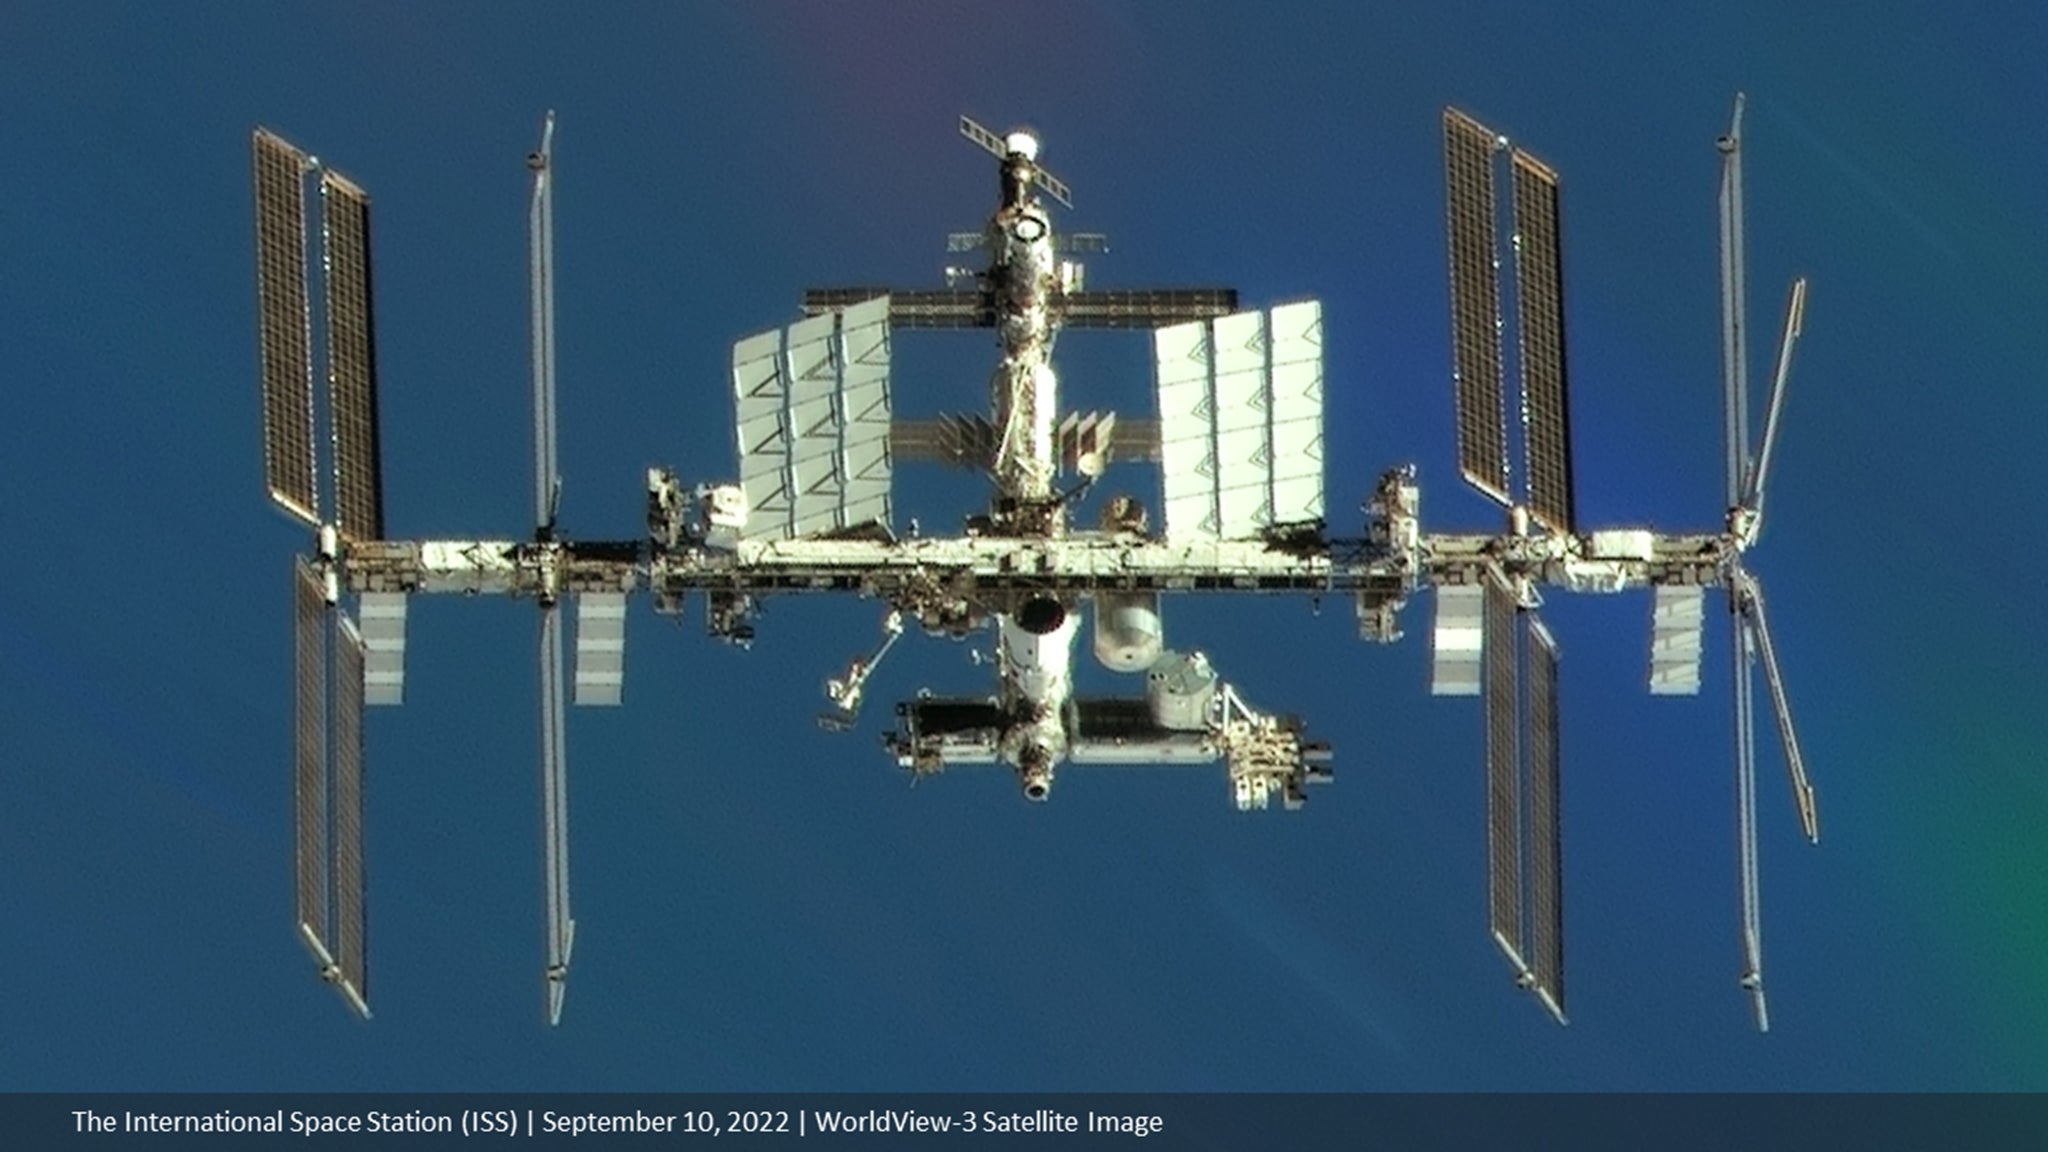 The International Space Station had to dodge debris in space